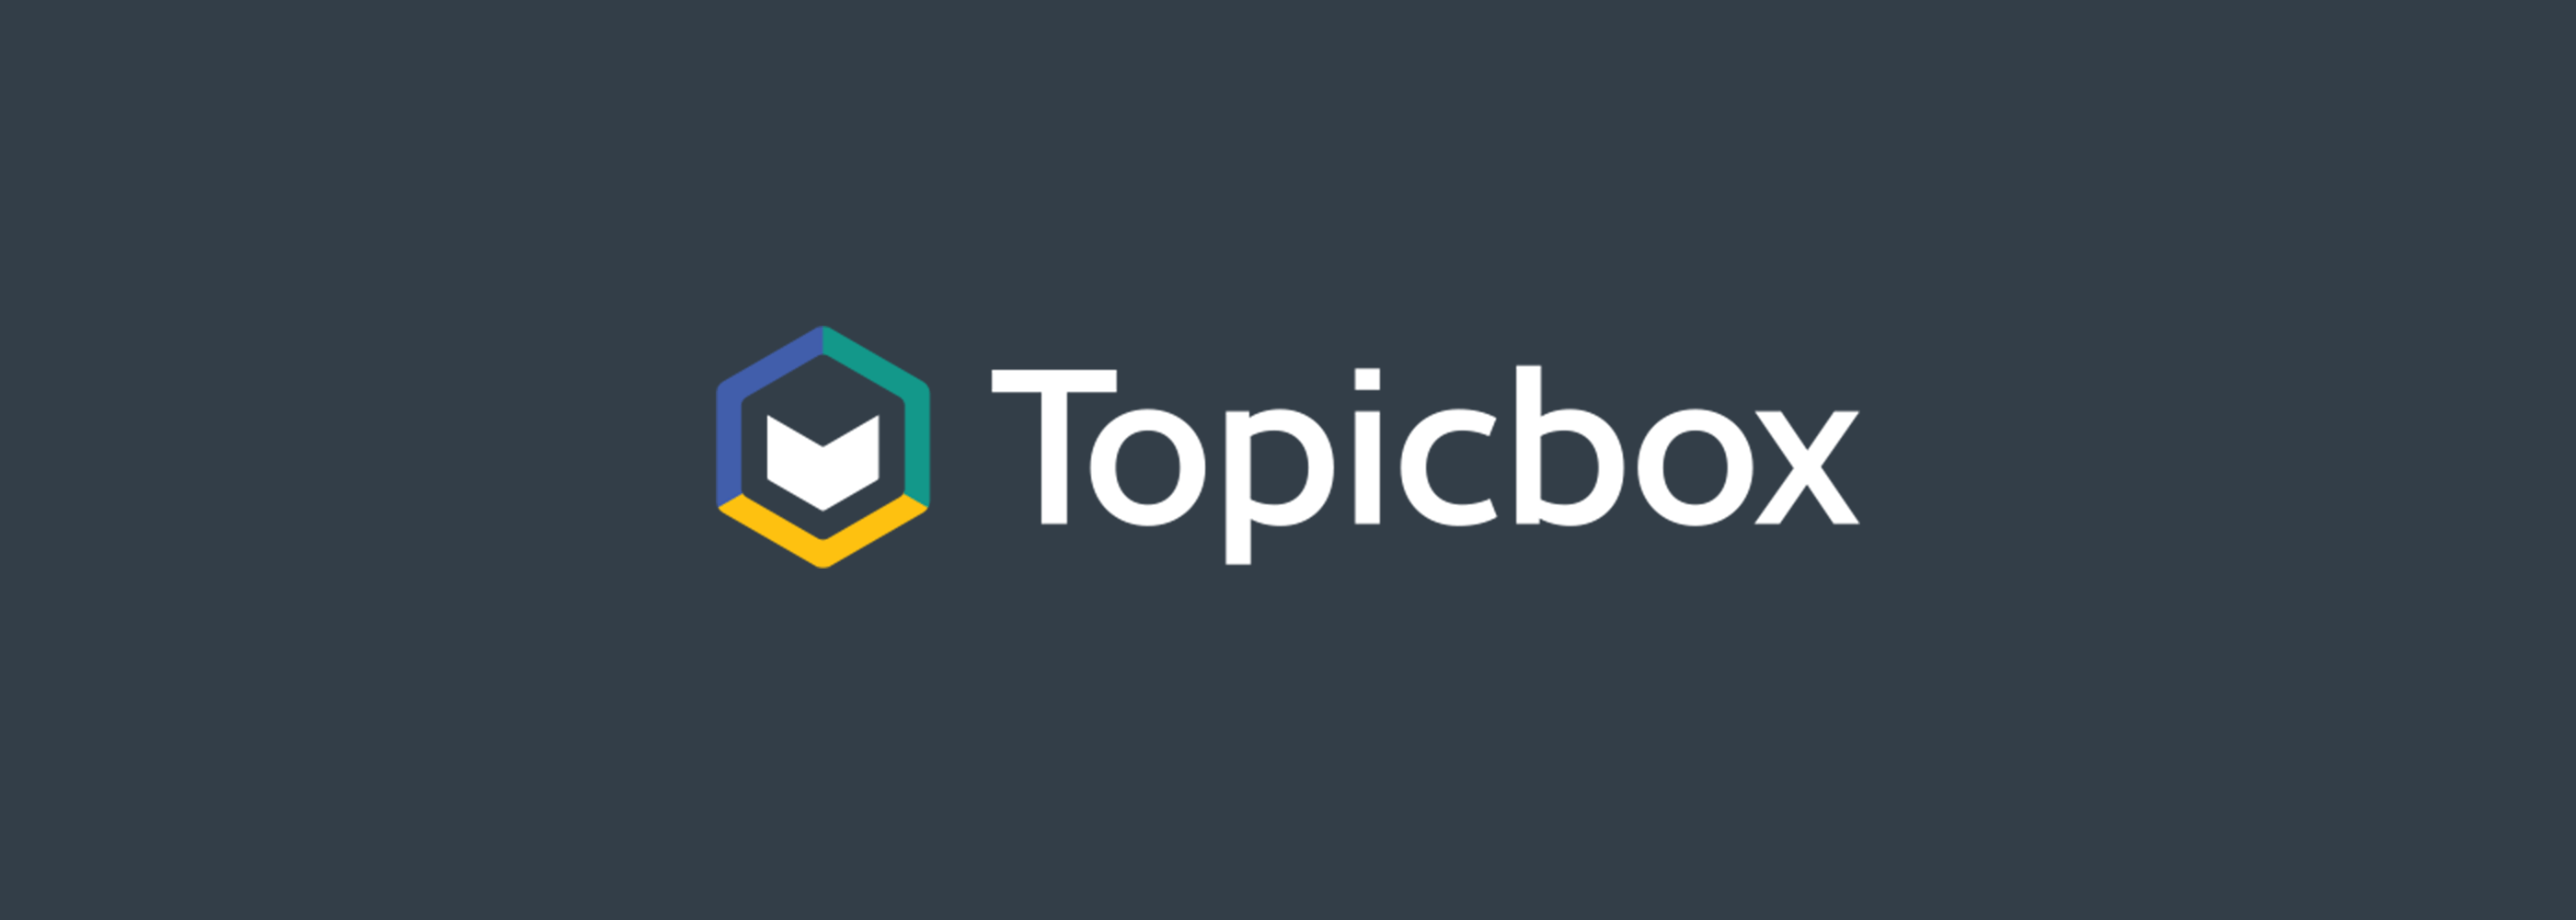 Blog Design spotlight: how the Topicbox logo came to be Hero Image